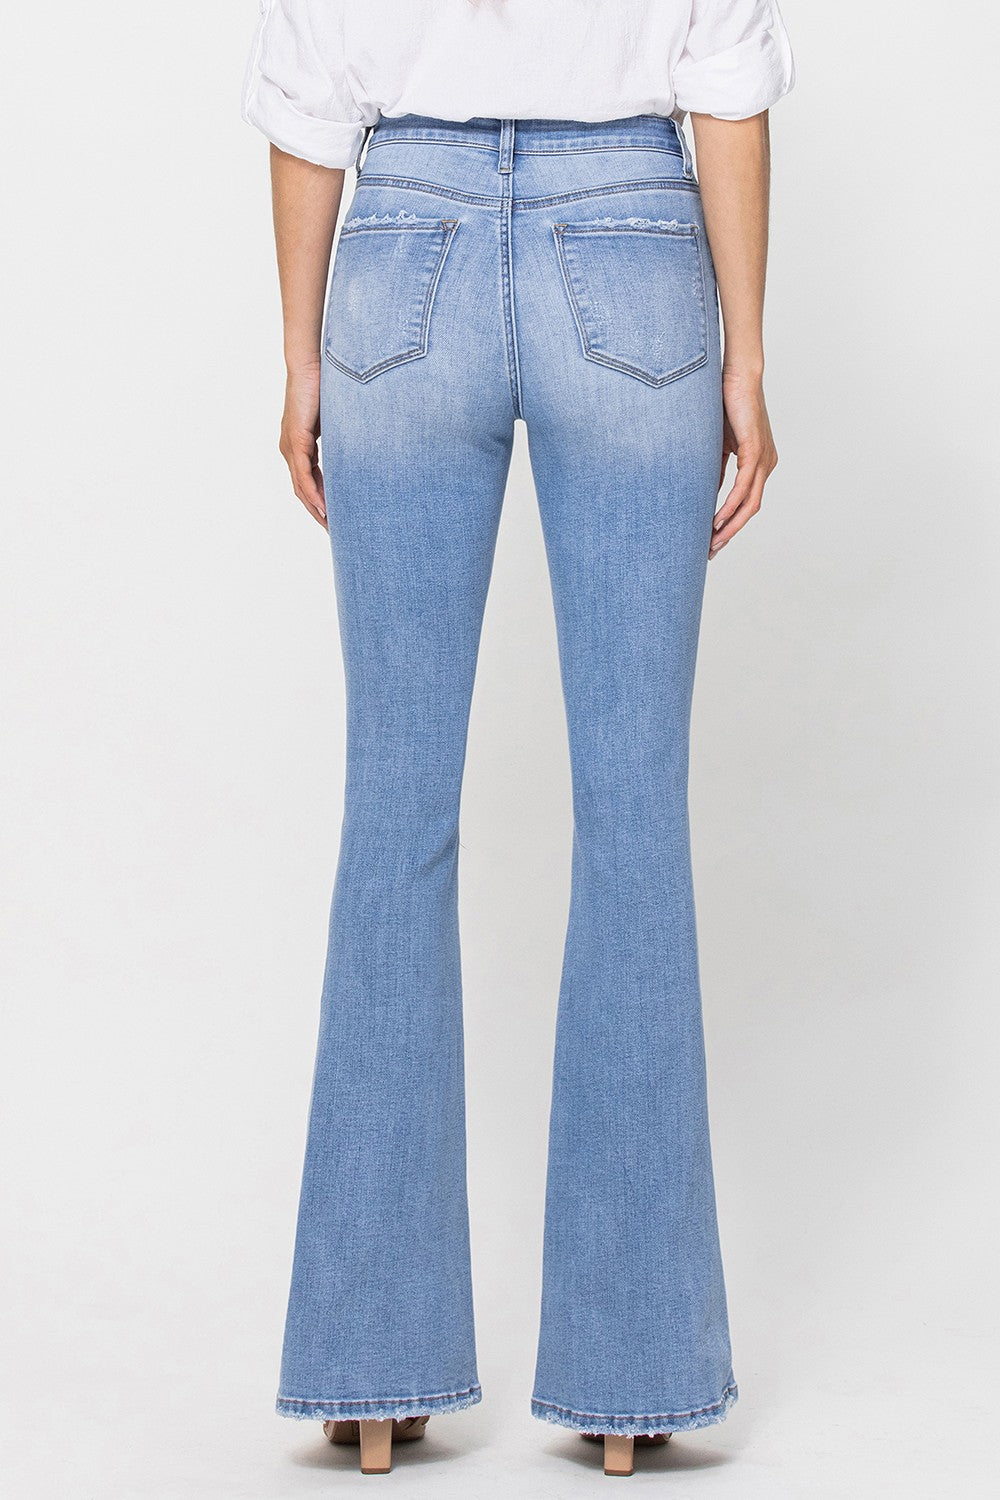 The Bella High Rise Long Jeans